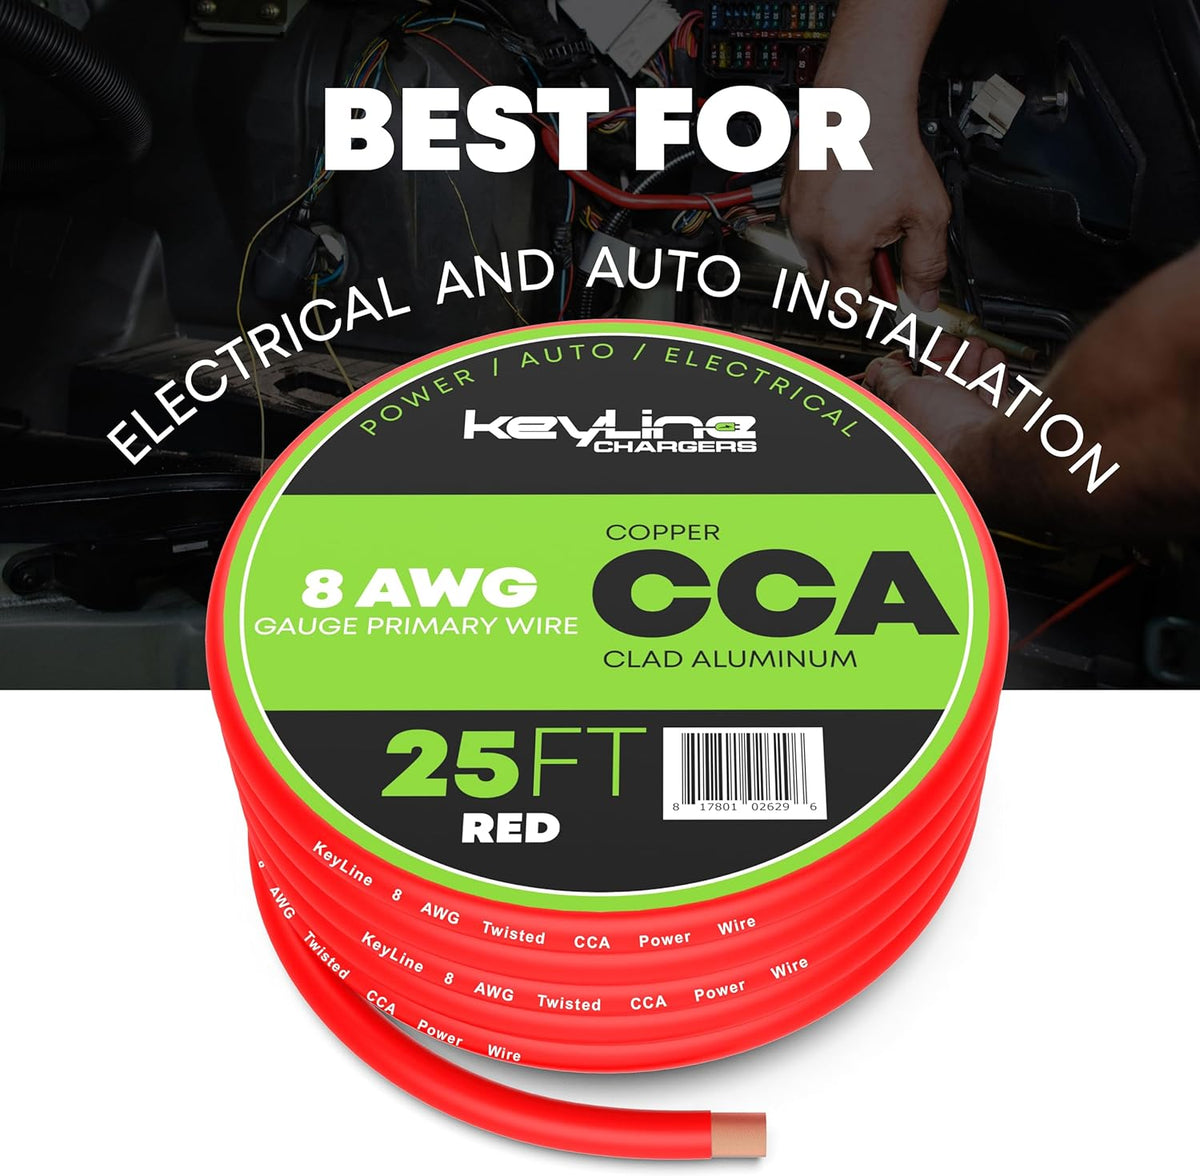 8 Gauge Wire - 25ft Red | 8 Gauge Amp Wire, Battery Cable, Marine Speaker Wire, Solar Cables for RV Trailer, Car Audio Speaker Cable, 8 AWG Automotive Wire Copper Clad Aluminum (CCA)